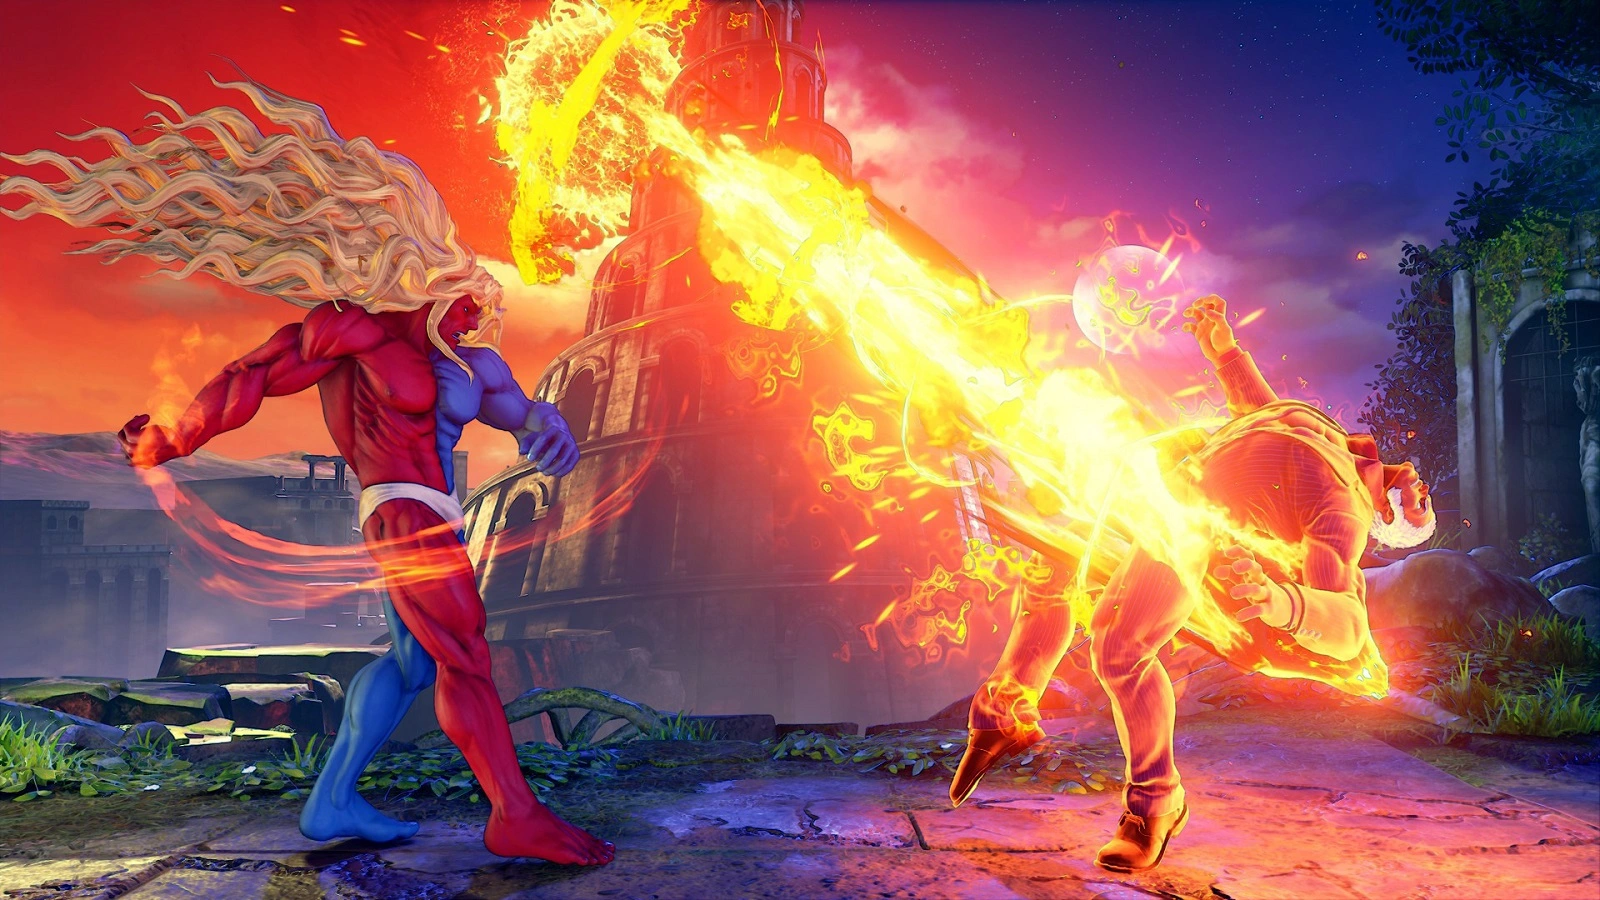 Street Fighter V: Champion Edition Review –